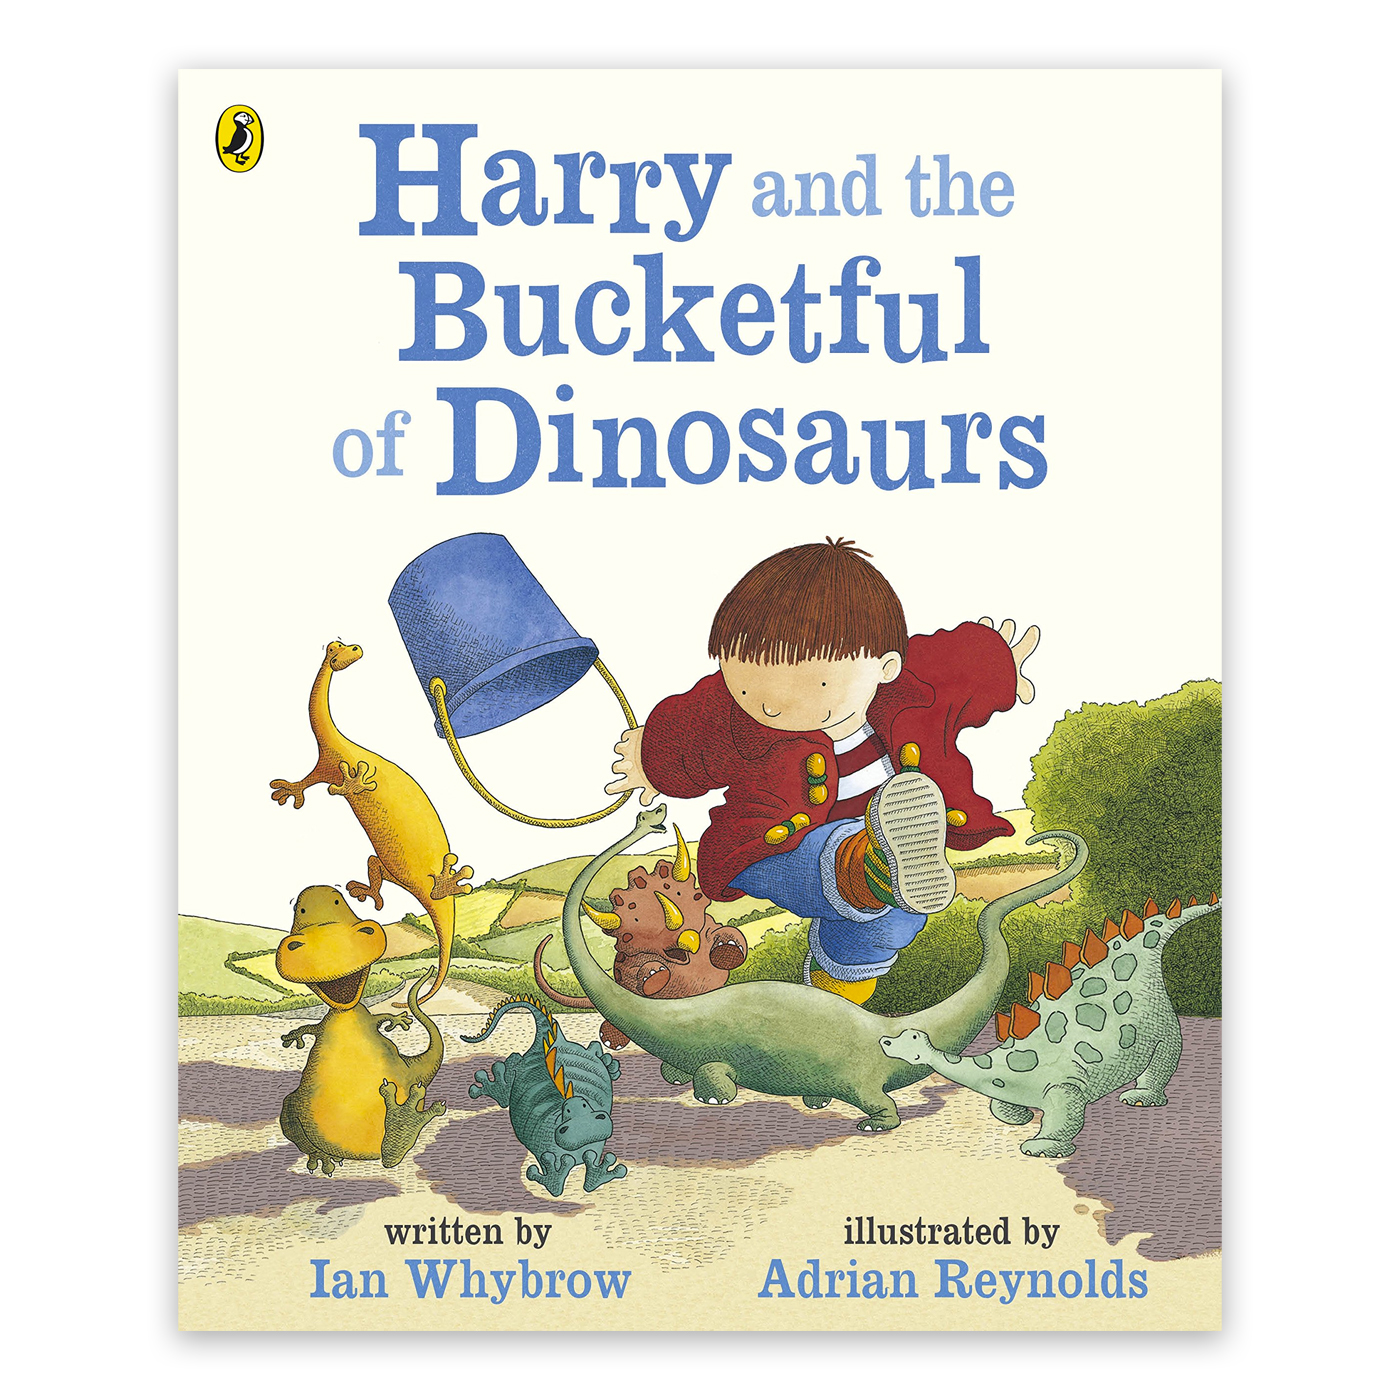  Harry and the Bucketful of Dinosaurs